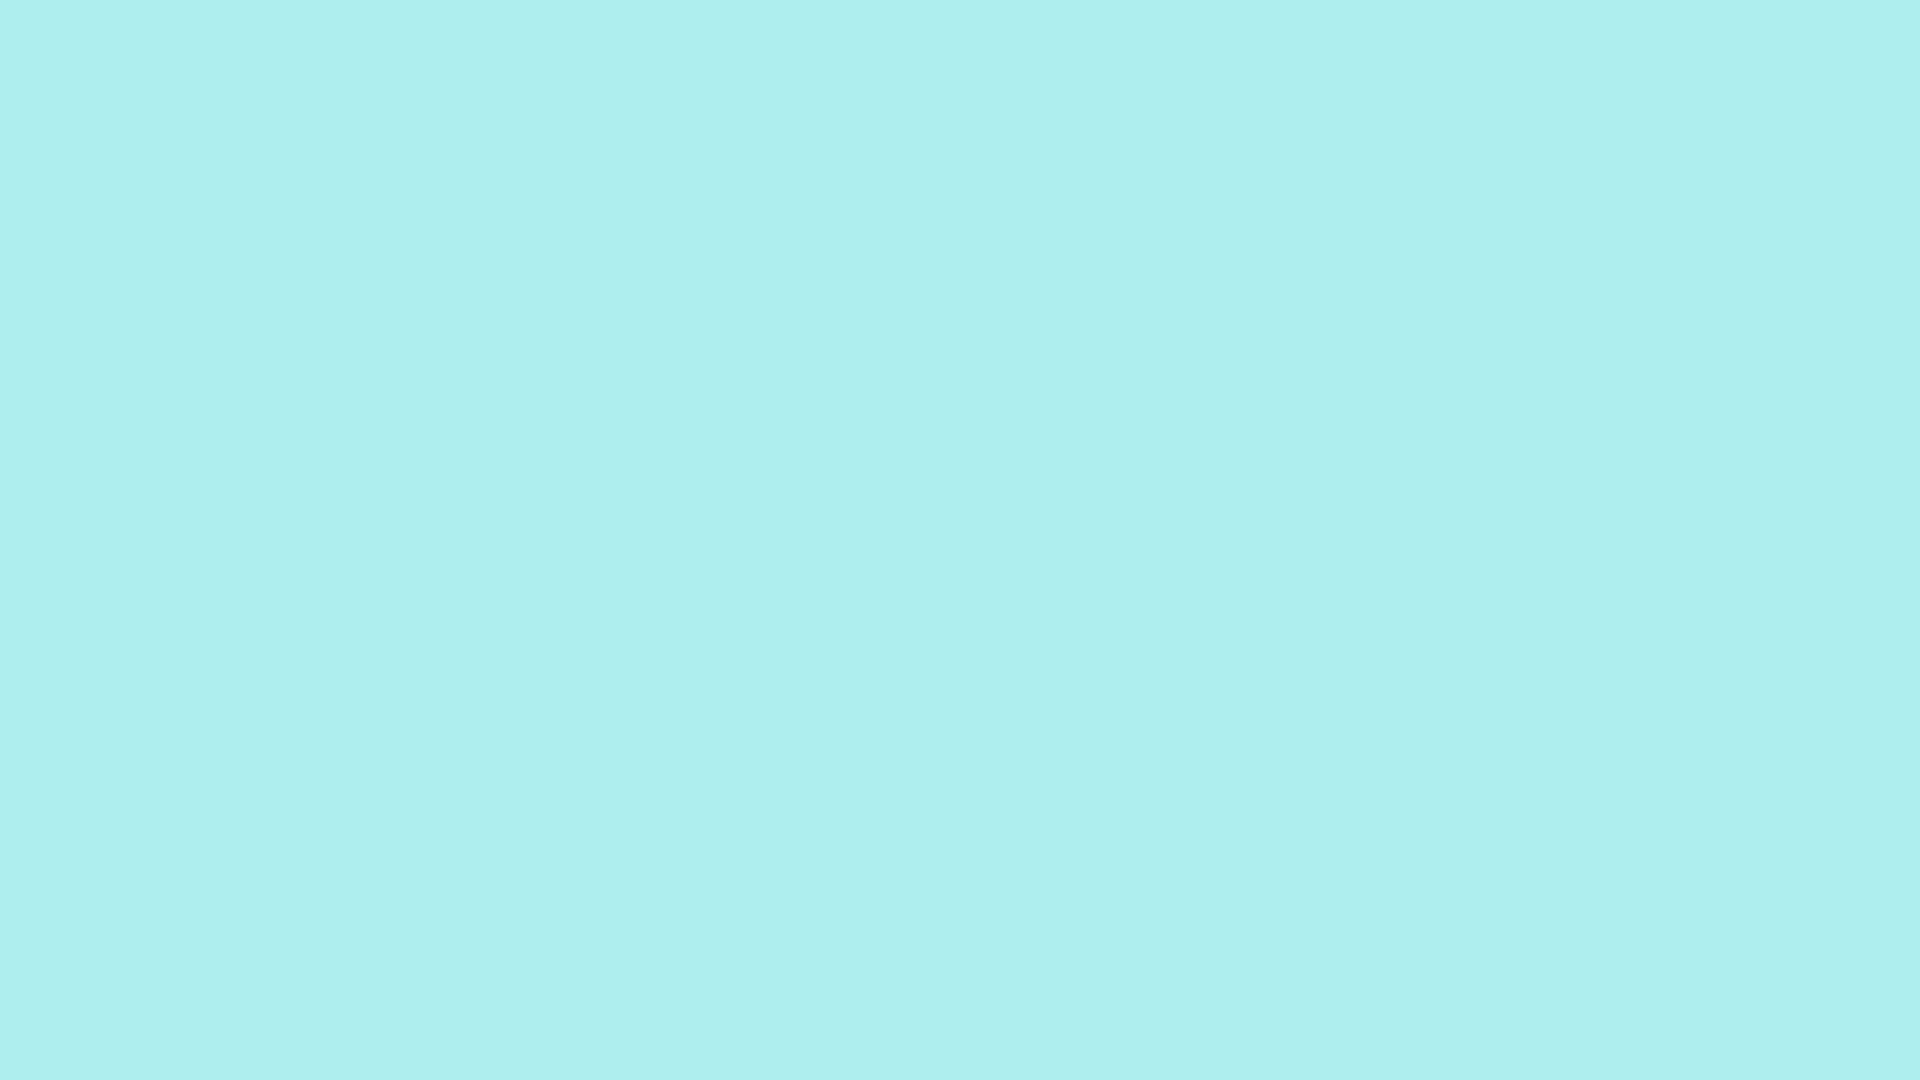 1920x1080 Pale Turquoise Solid Color Background